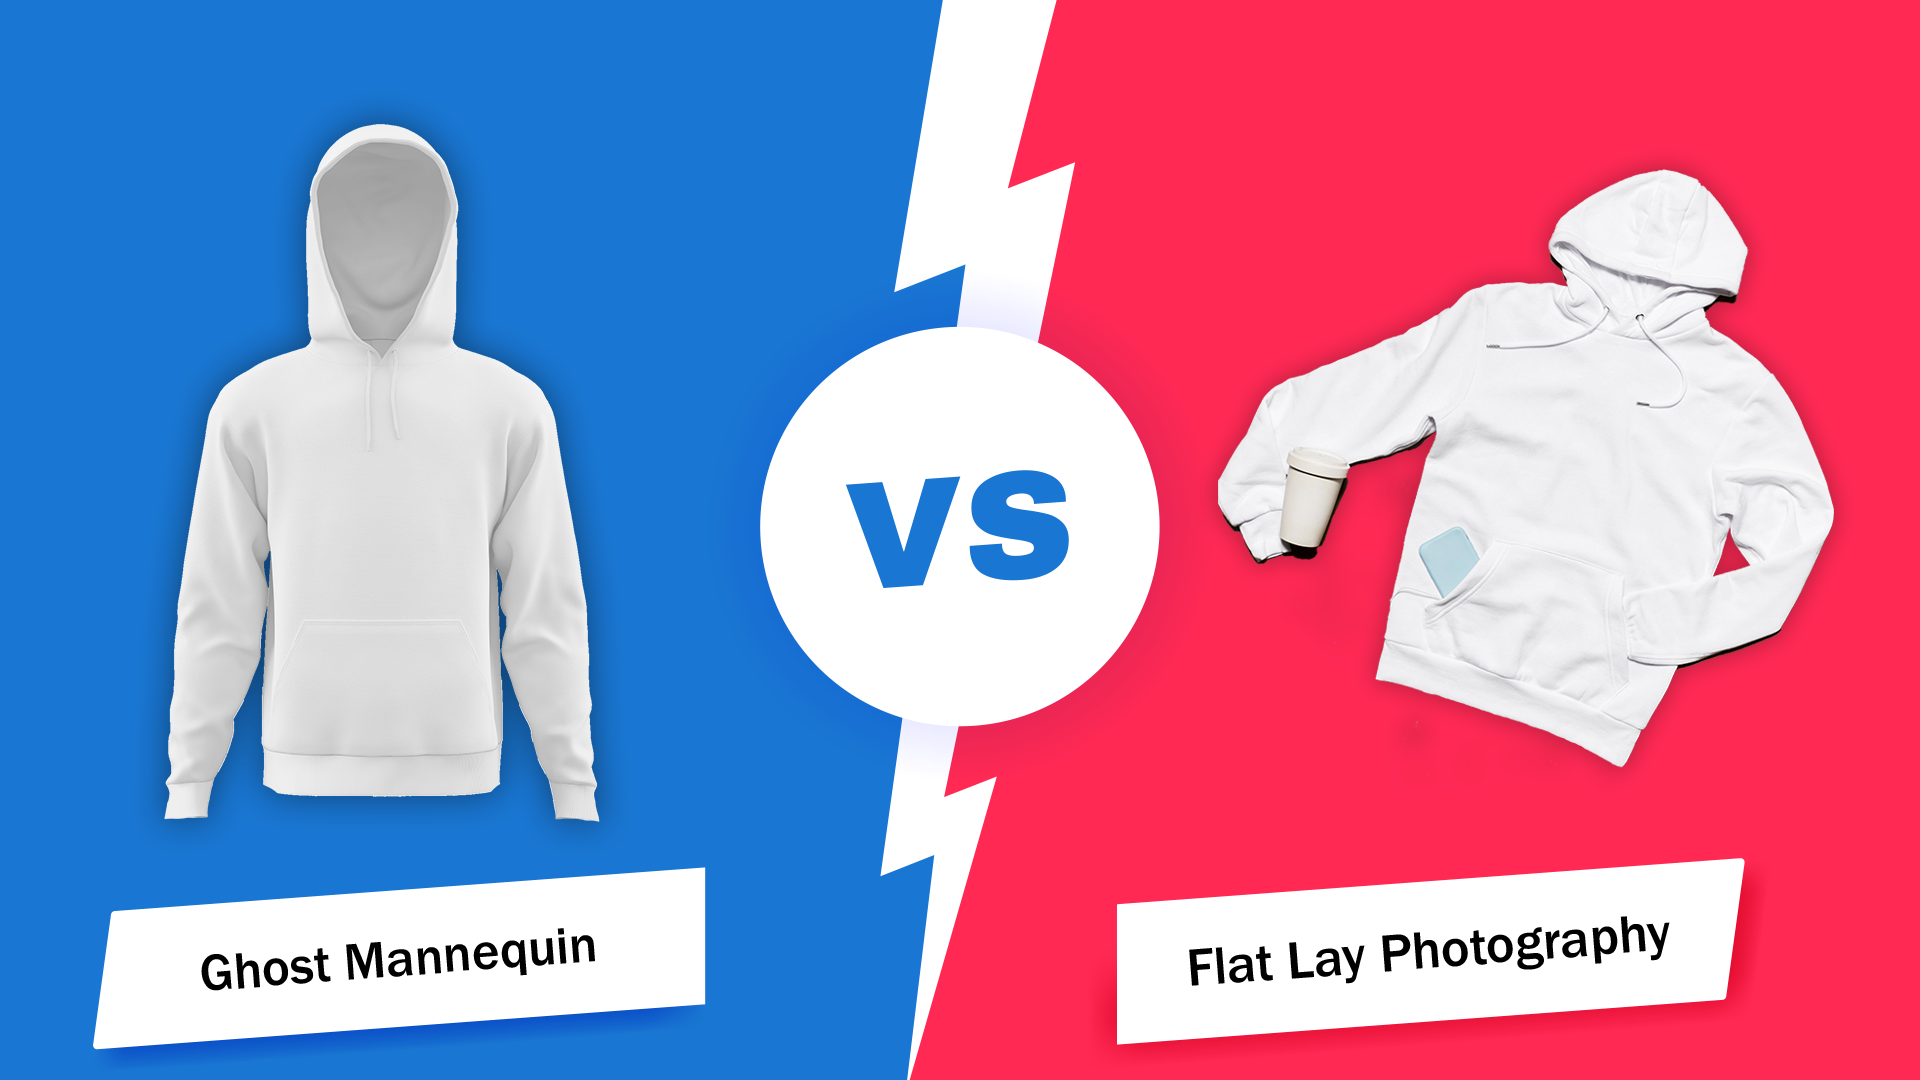 Ghost Mannequin Service vs. Flat Lay Photography: Which Technique Is Better?